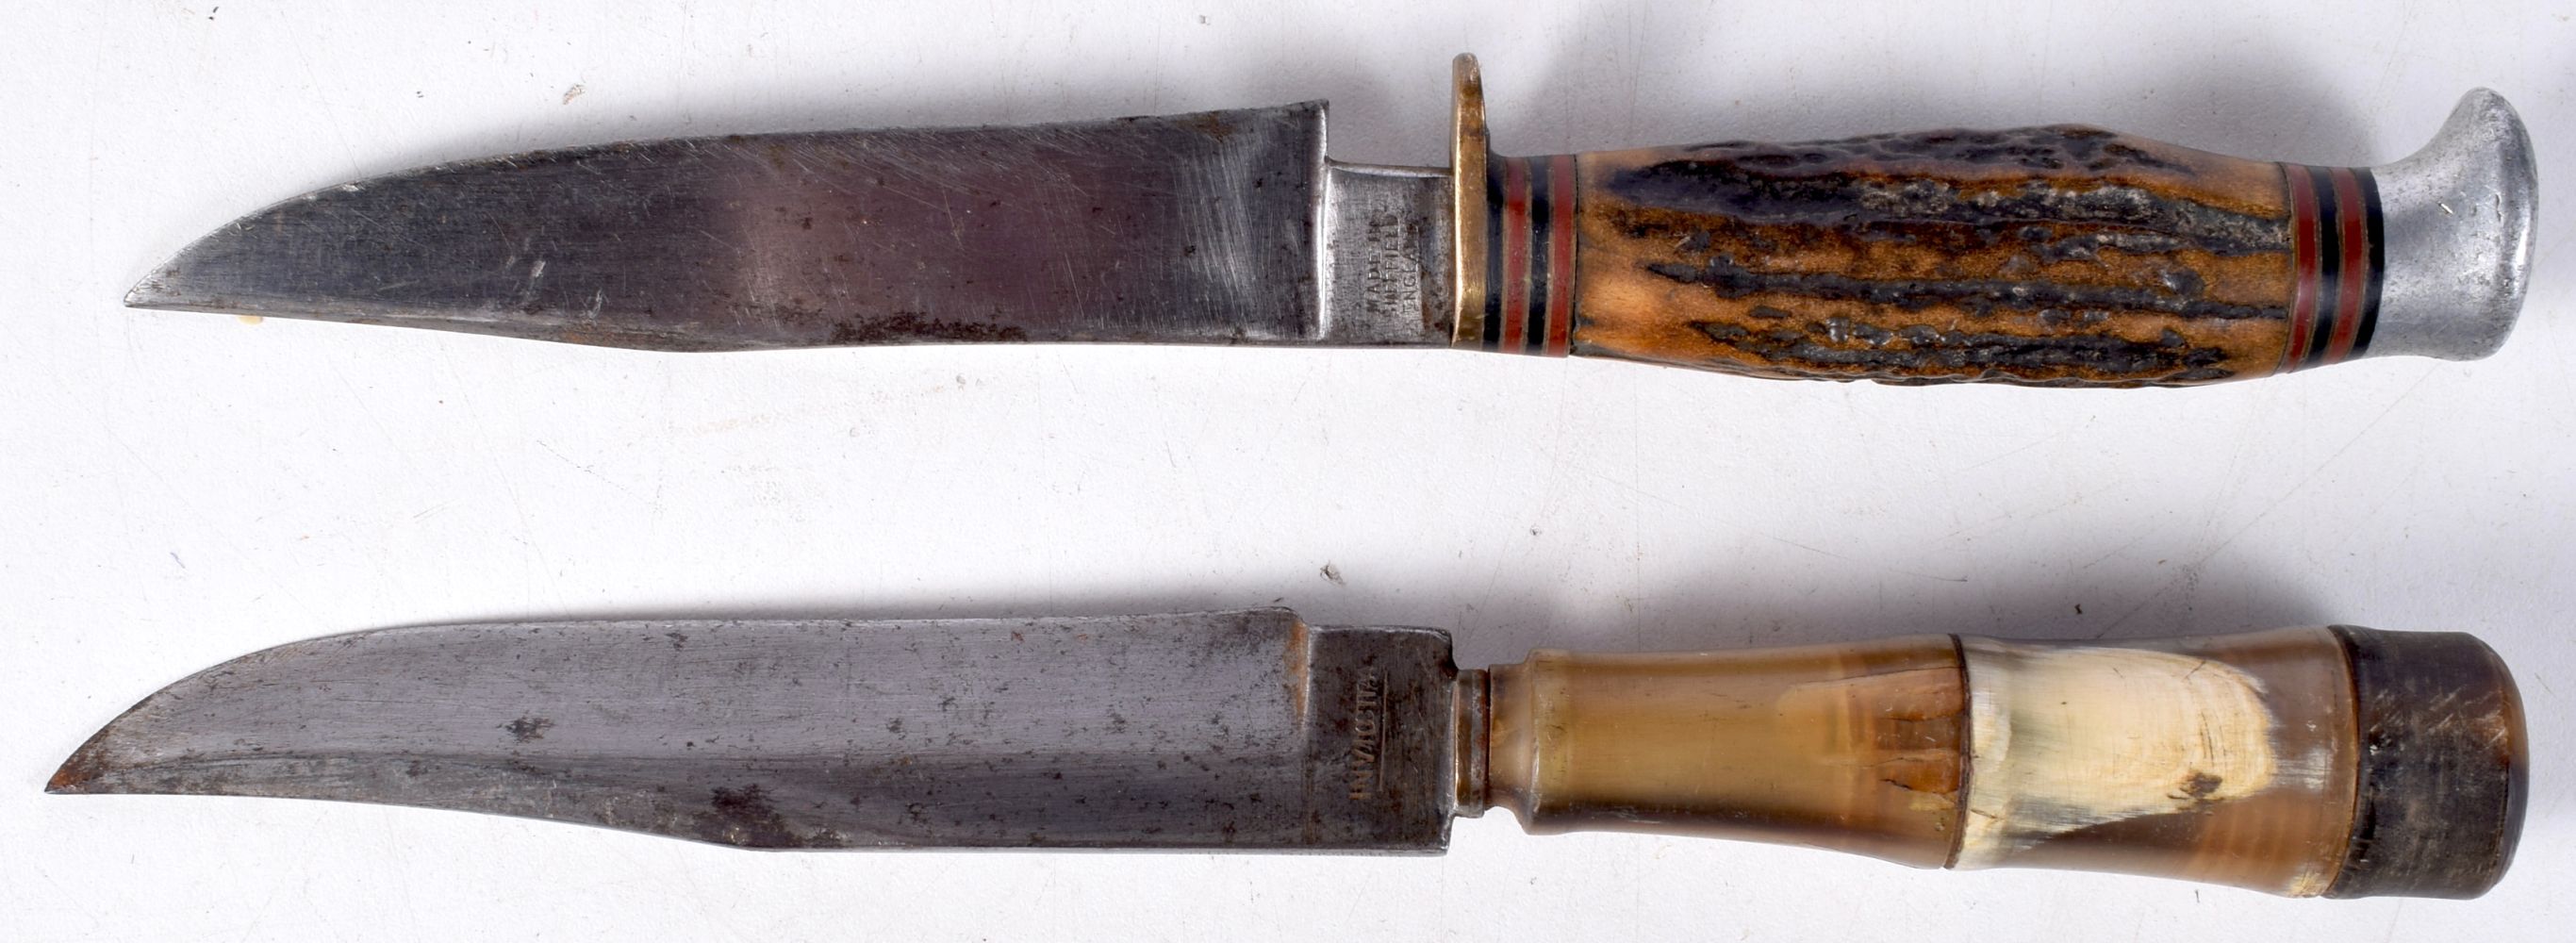 Two horn handled knives one by by Dickinson of Sheffield largest 23 cm (2). - Image 4 of 4